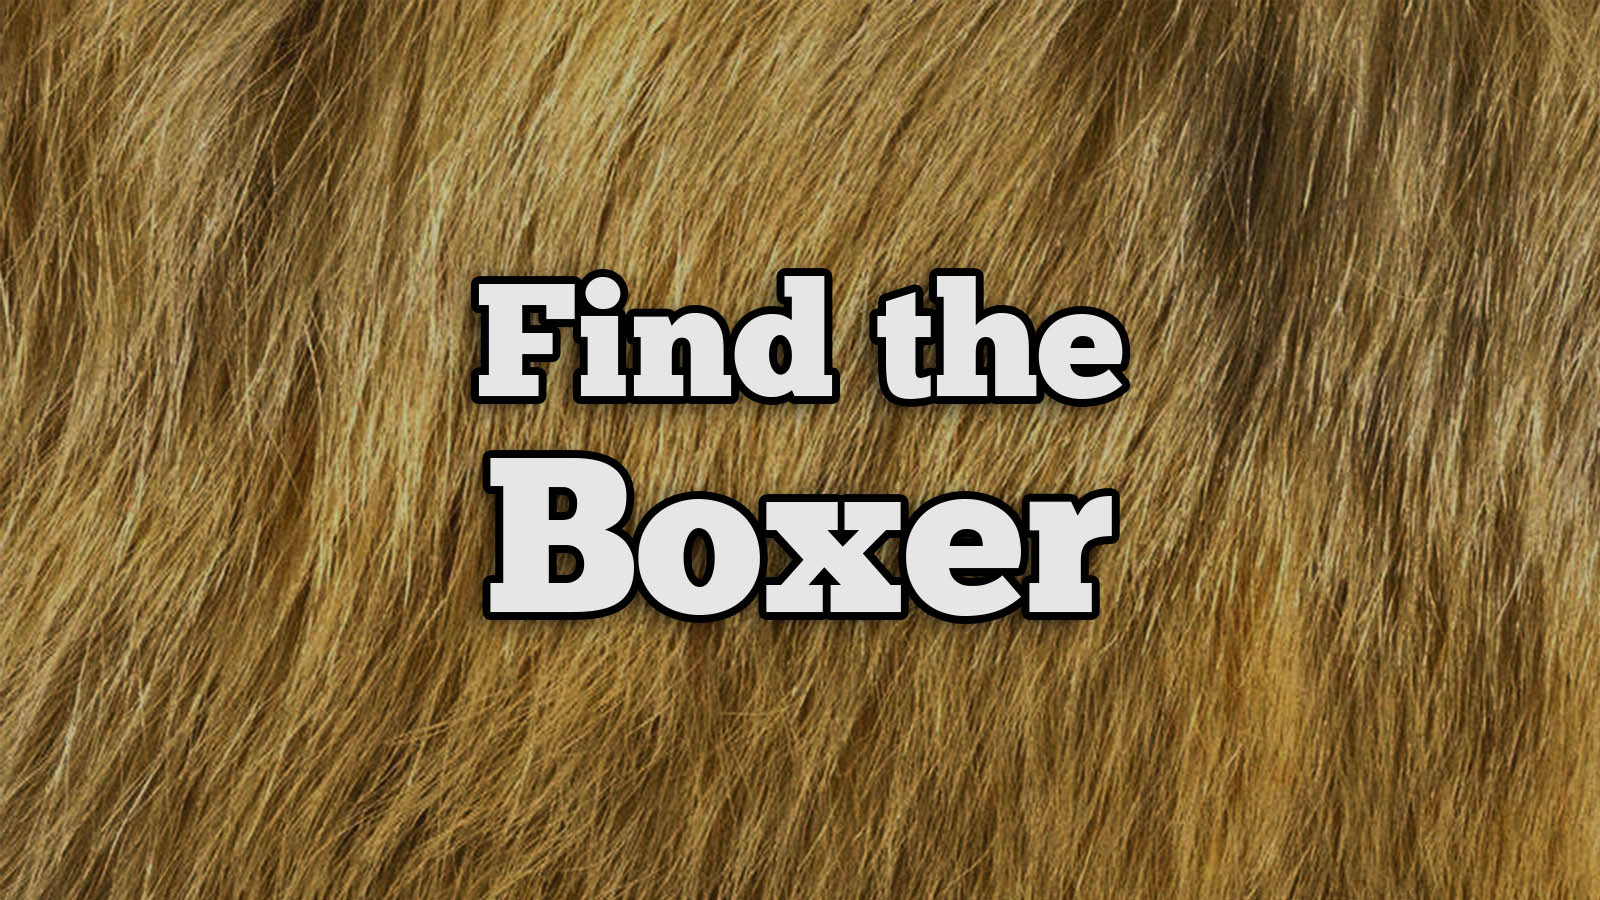 We Bet You Can’t Identify More Than 20/27 of These Dog Breeds Text Boxer